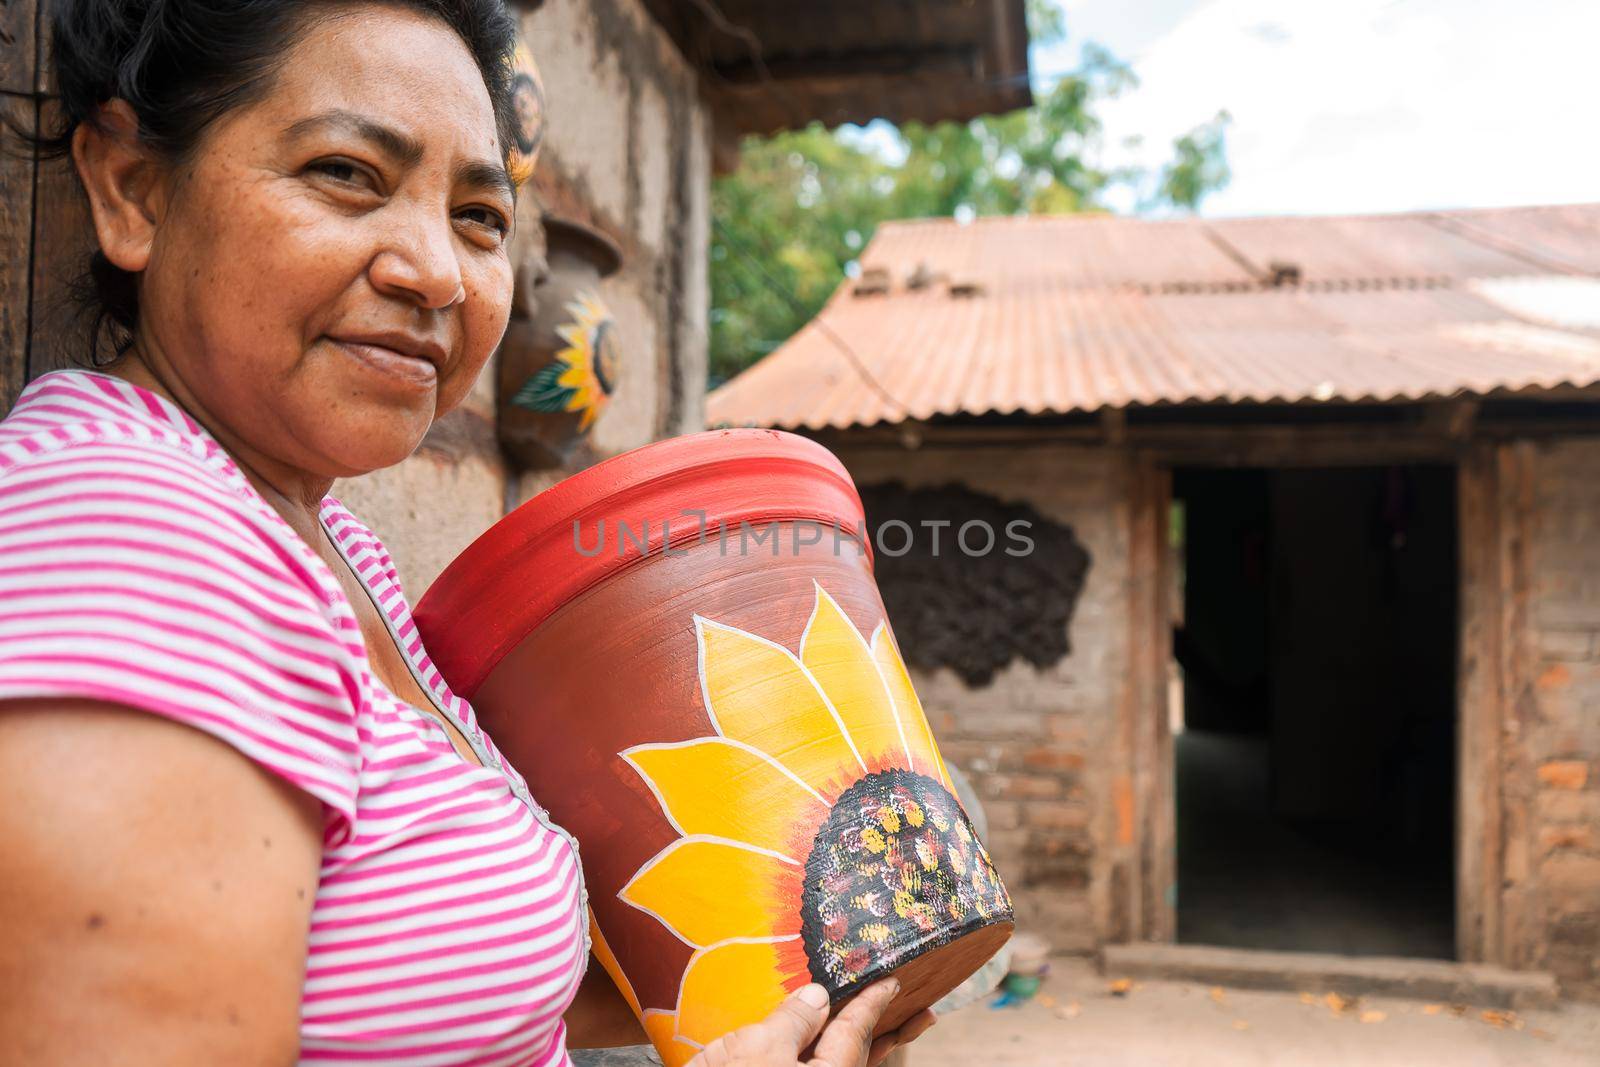 Artisan of La Paz Centro Nicaragua smiling at the camera and holding a clay vase made by herself